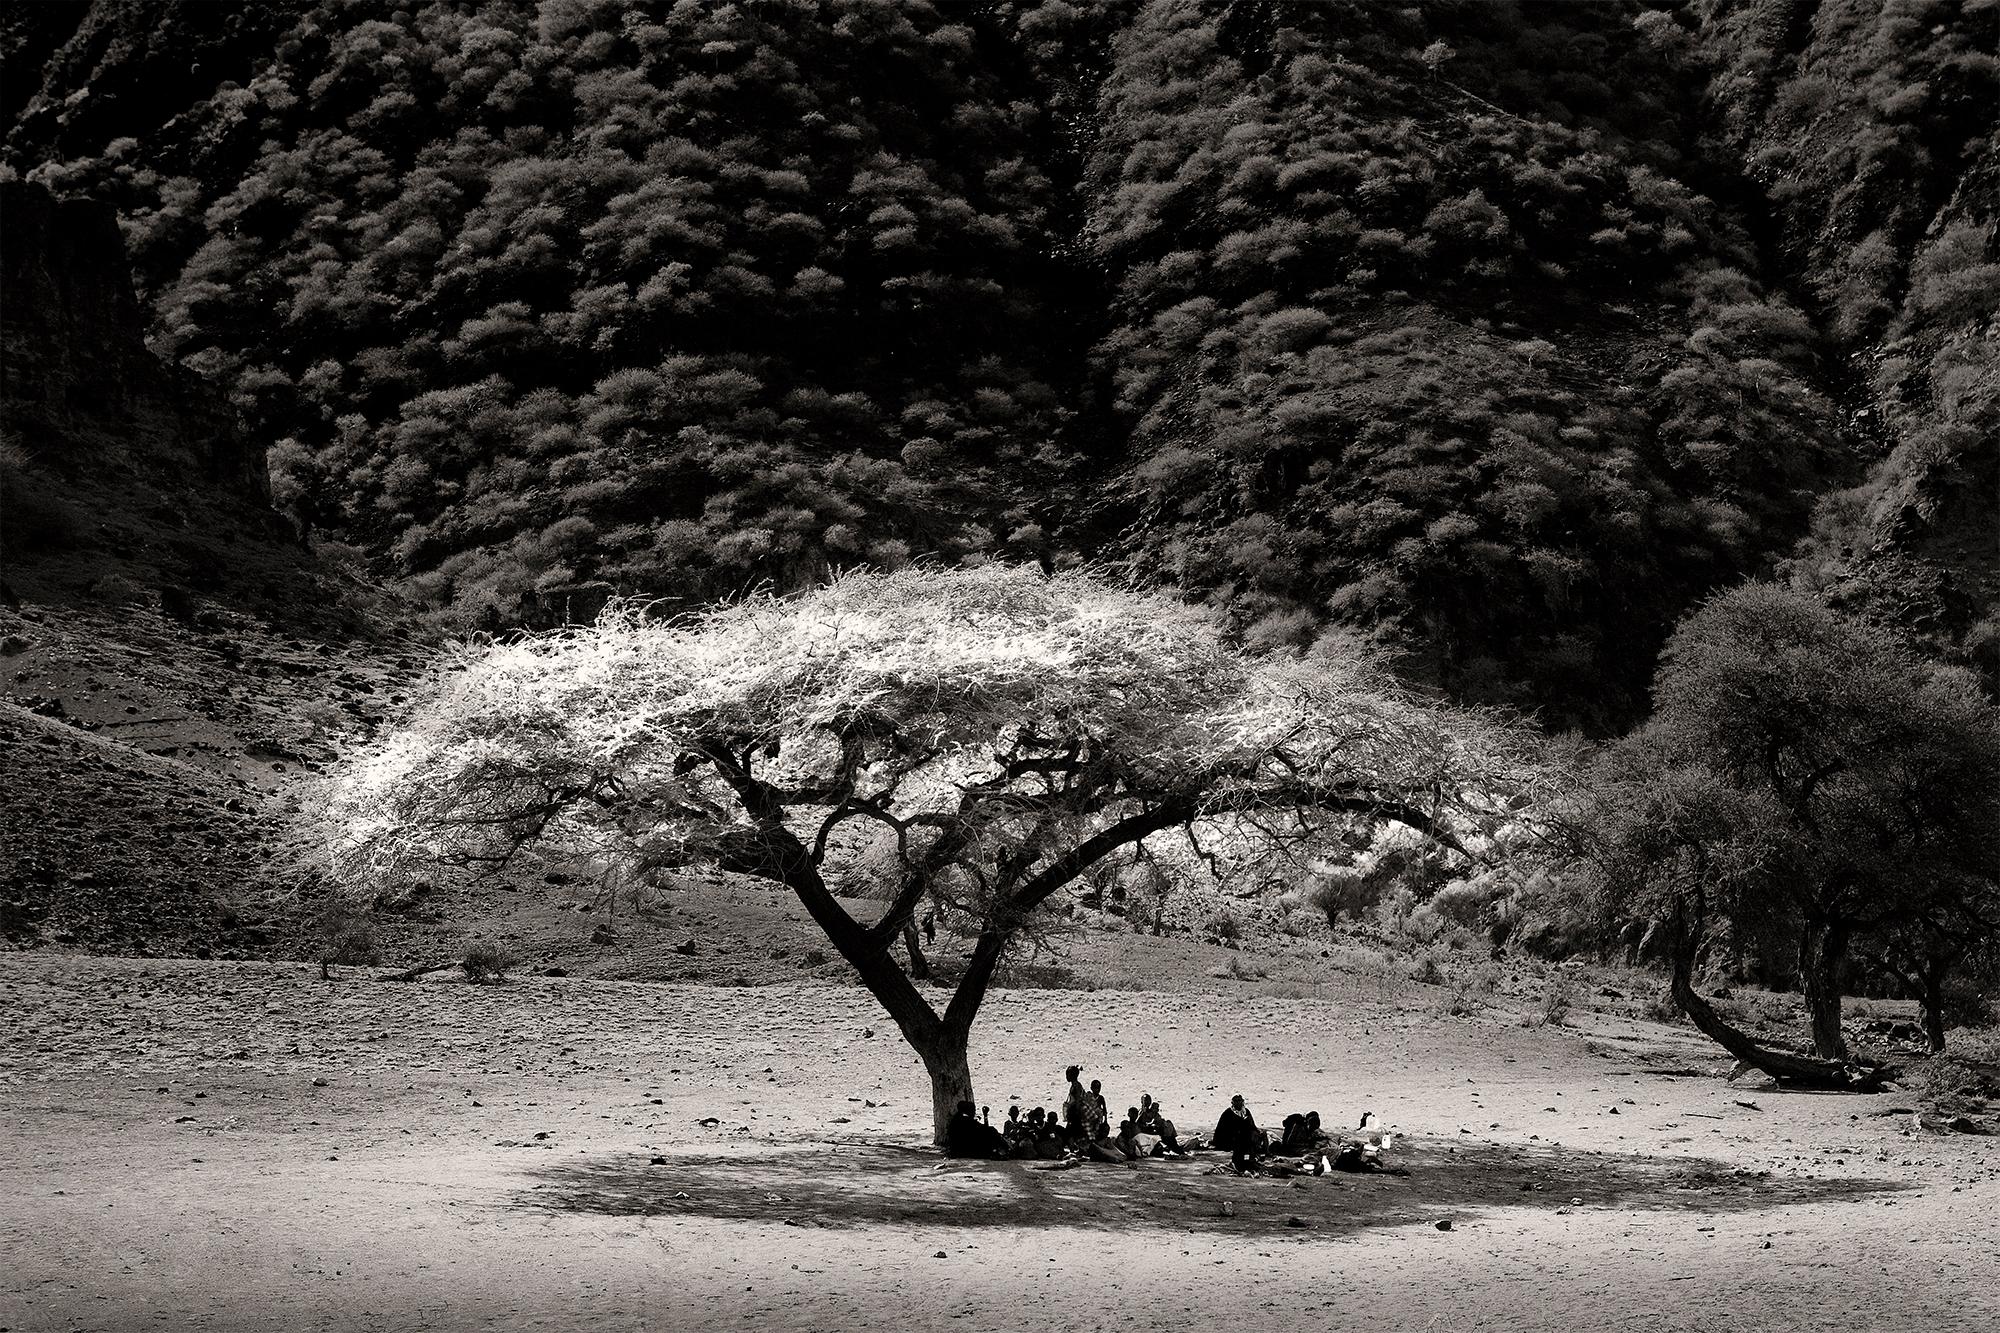 Joachim Schmeisser Black and White Photograph - Midday in Rift Valley, Africa, people, black and white photography, family